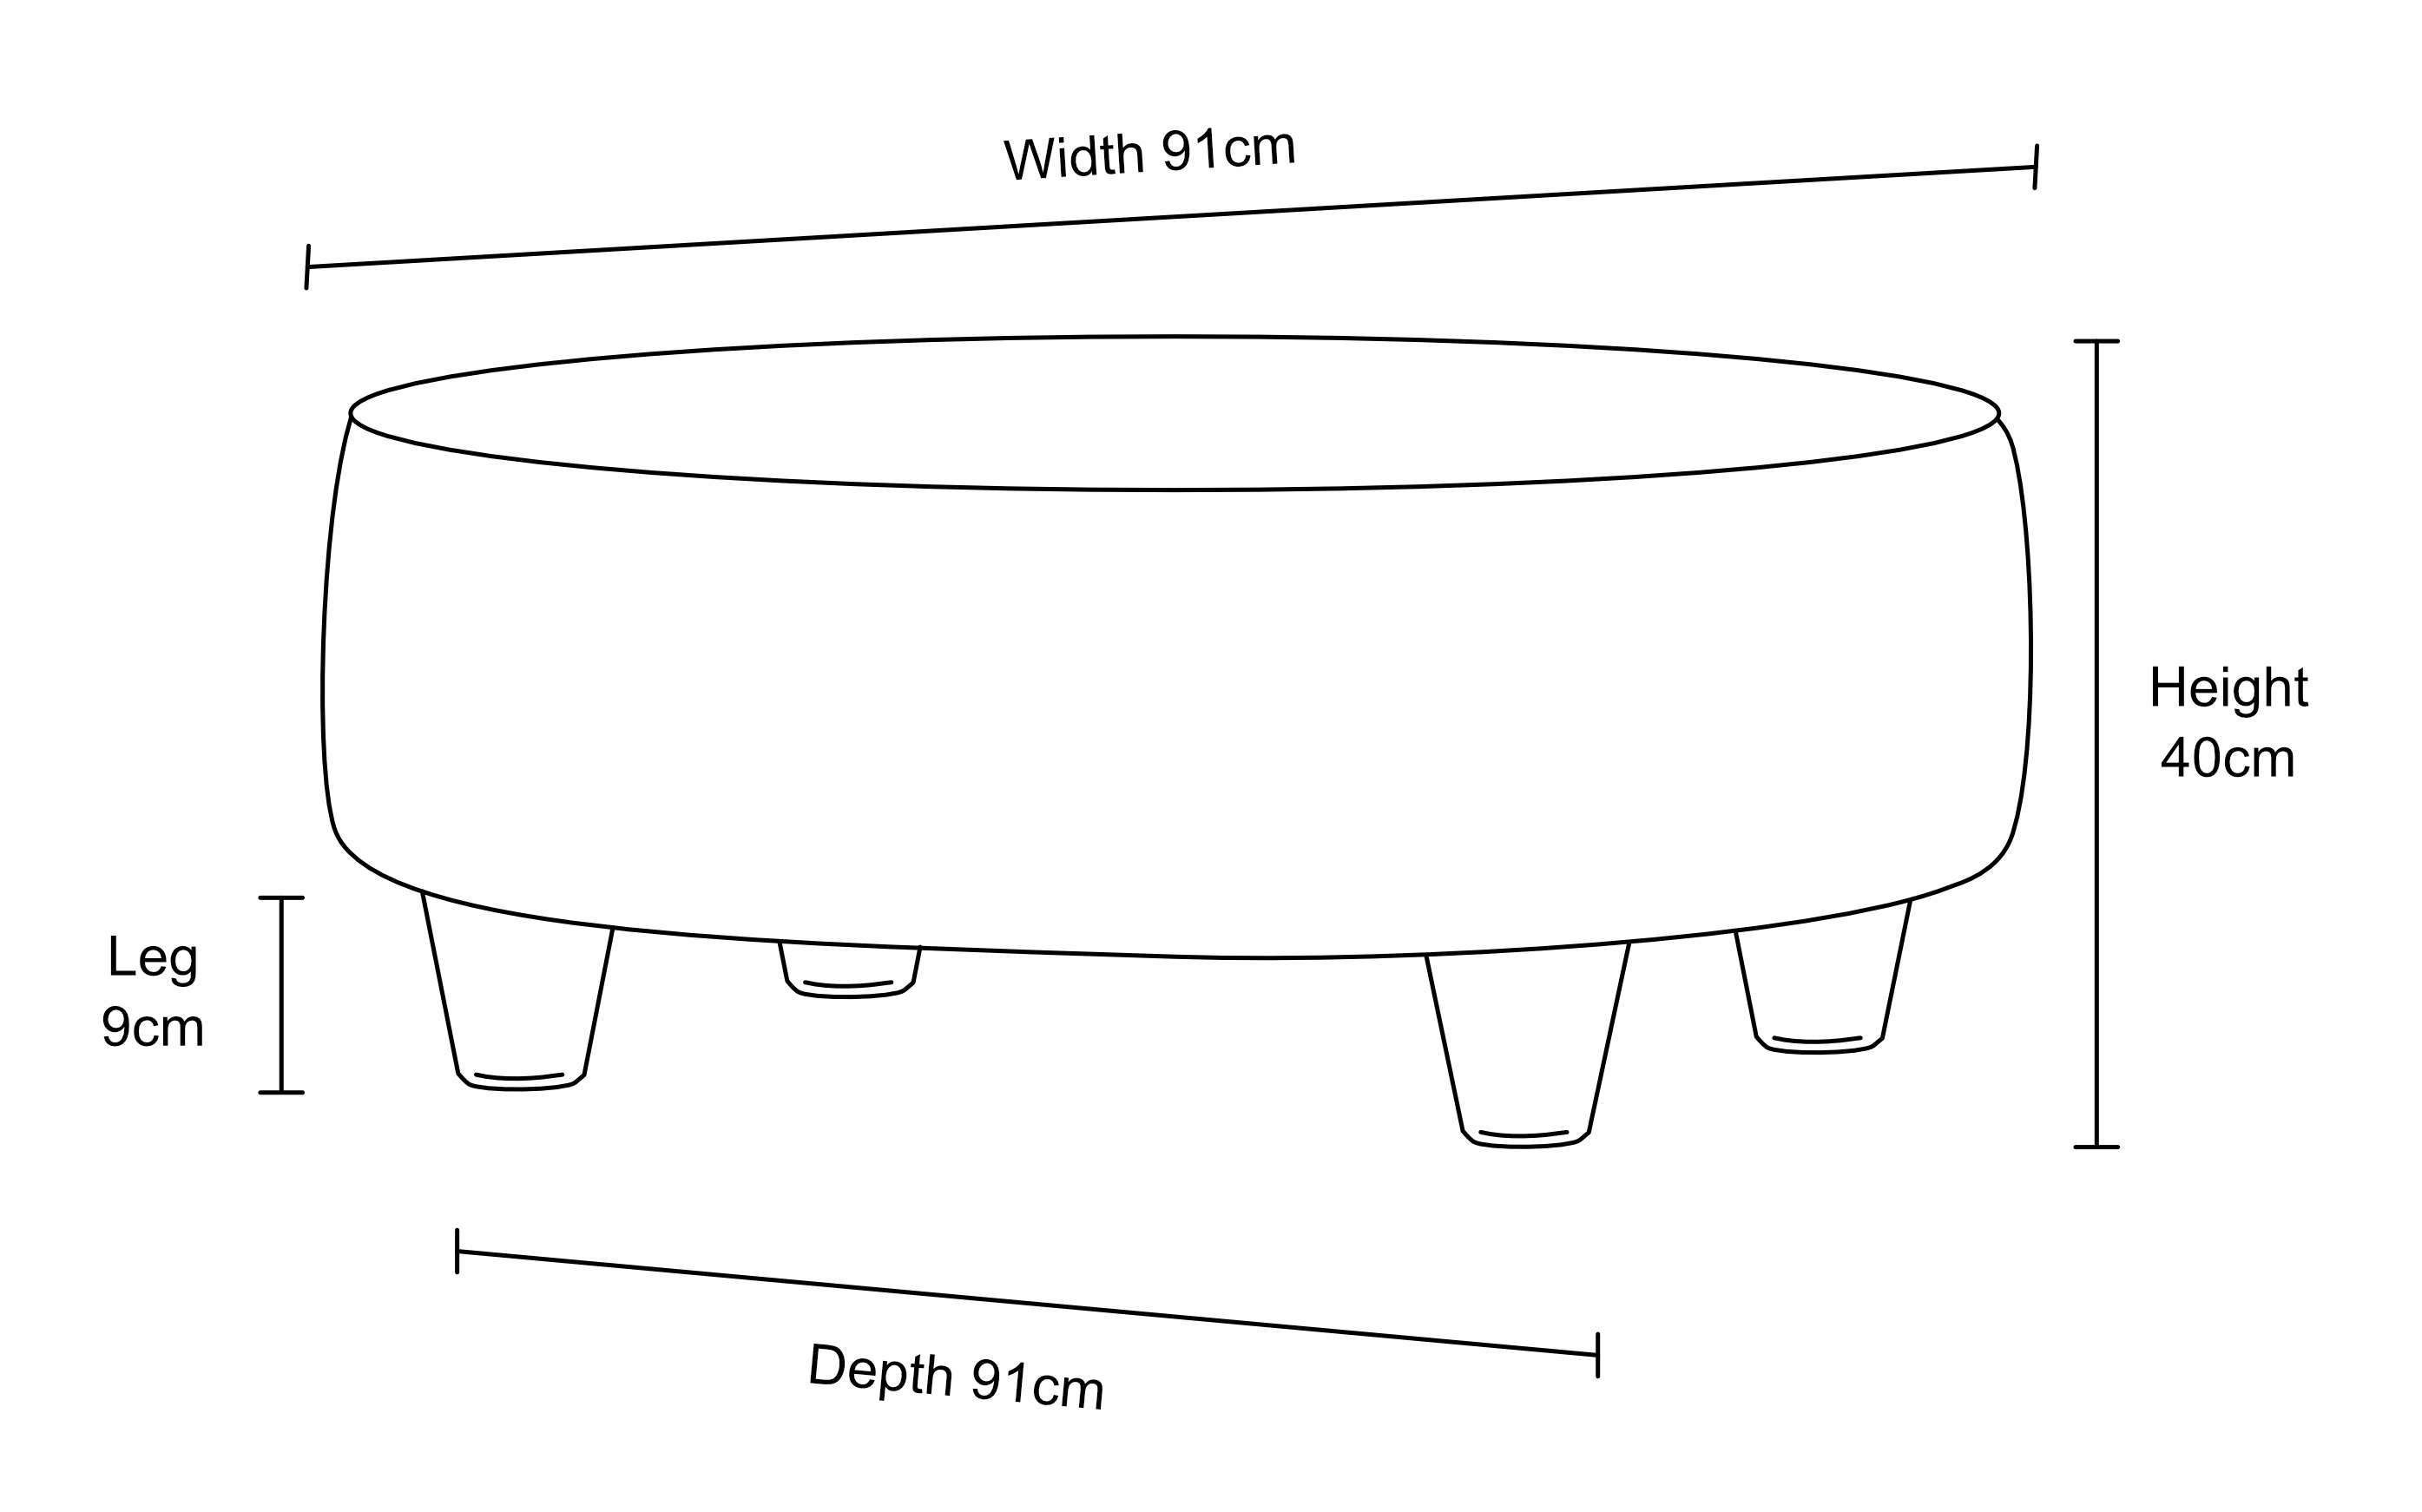 https://www.footstools.co.uk/wp-content/uploads/round-footstool-36x36-dimensions.jpg